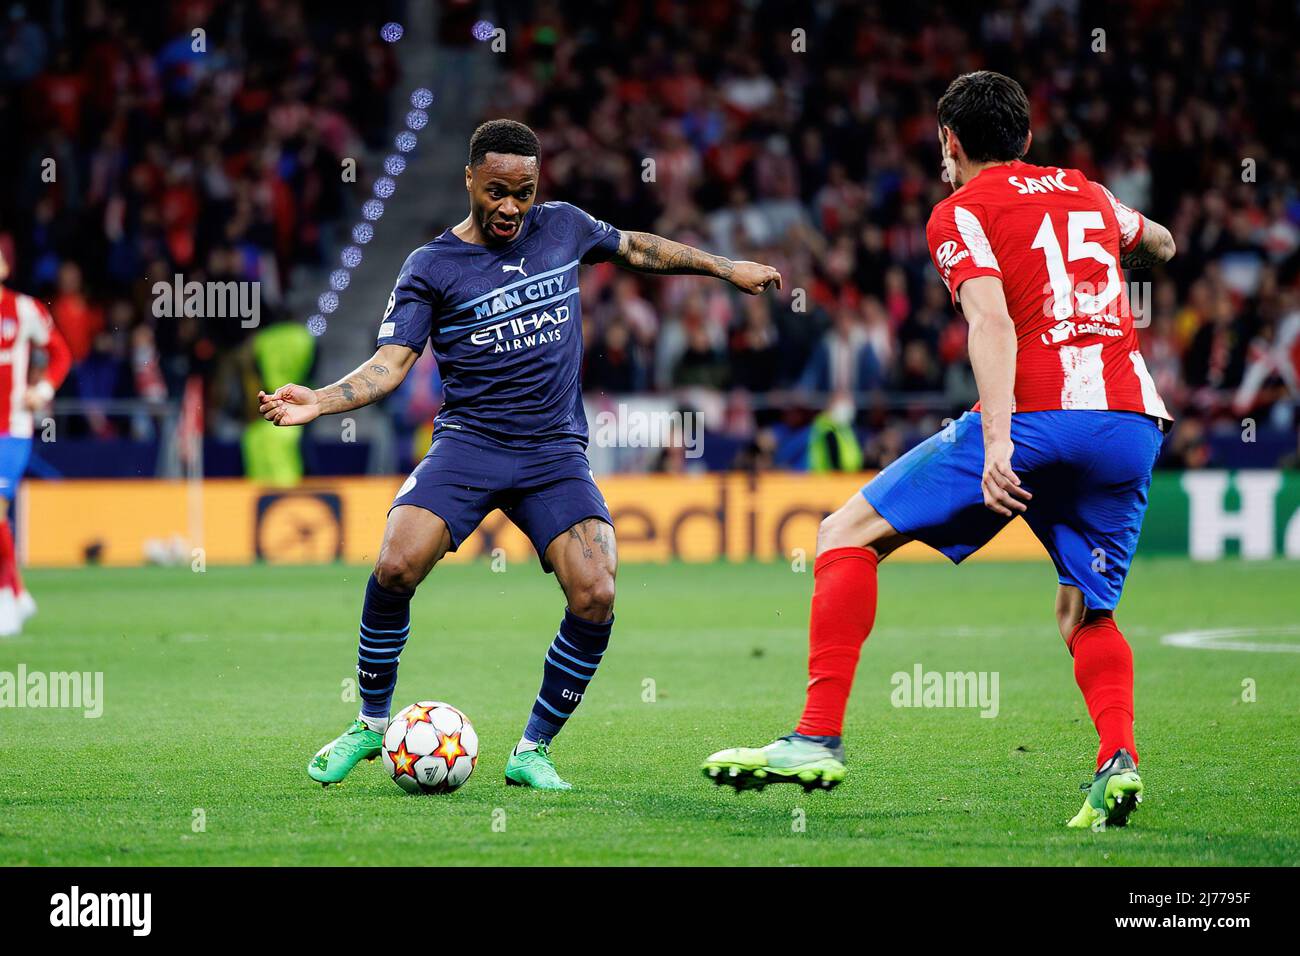 MADRID - APR 13: Sterling in action during the Champions League match between Club Atletico de Madrid and Manchester City at the Metropolitano Stadium Stock Photo